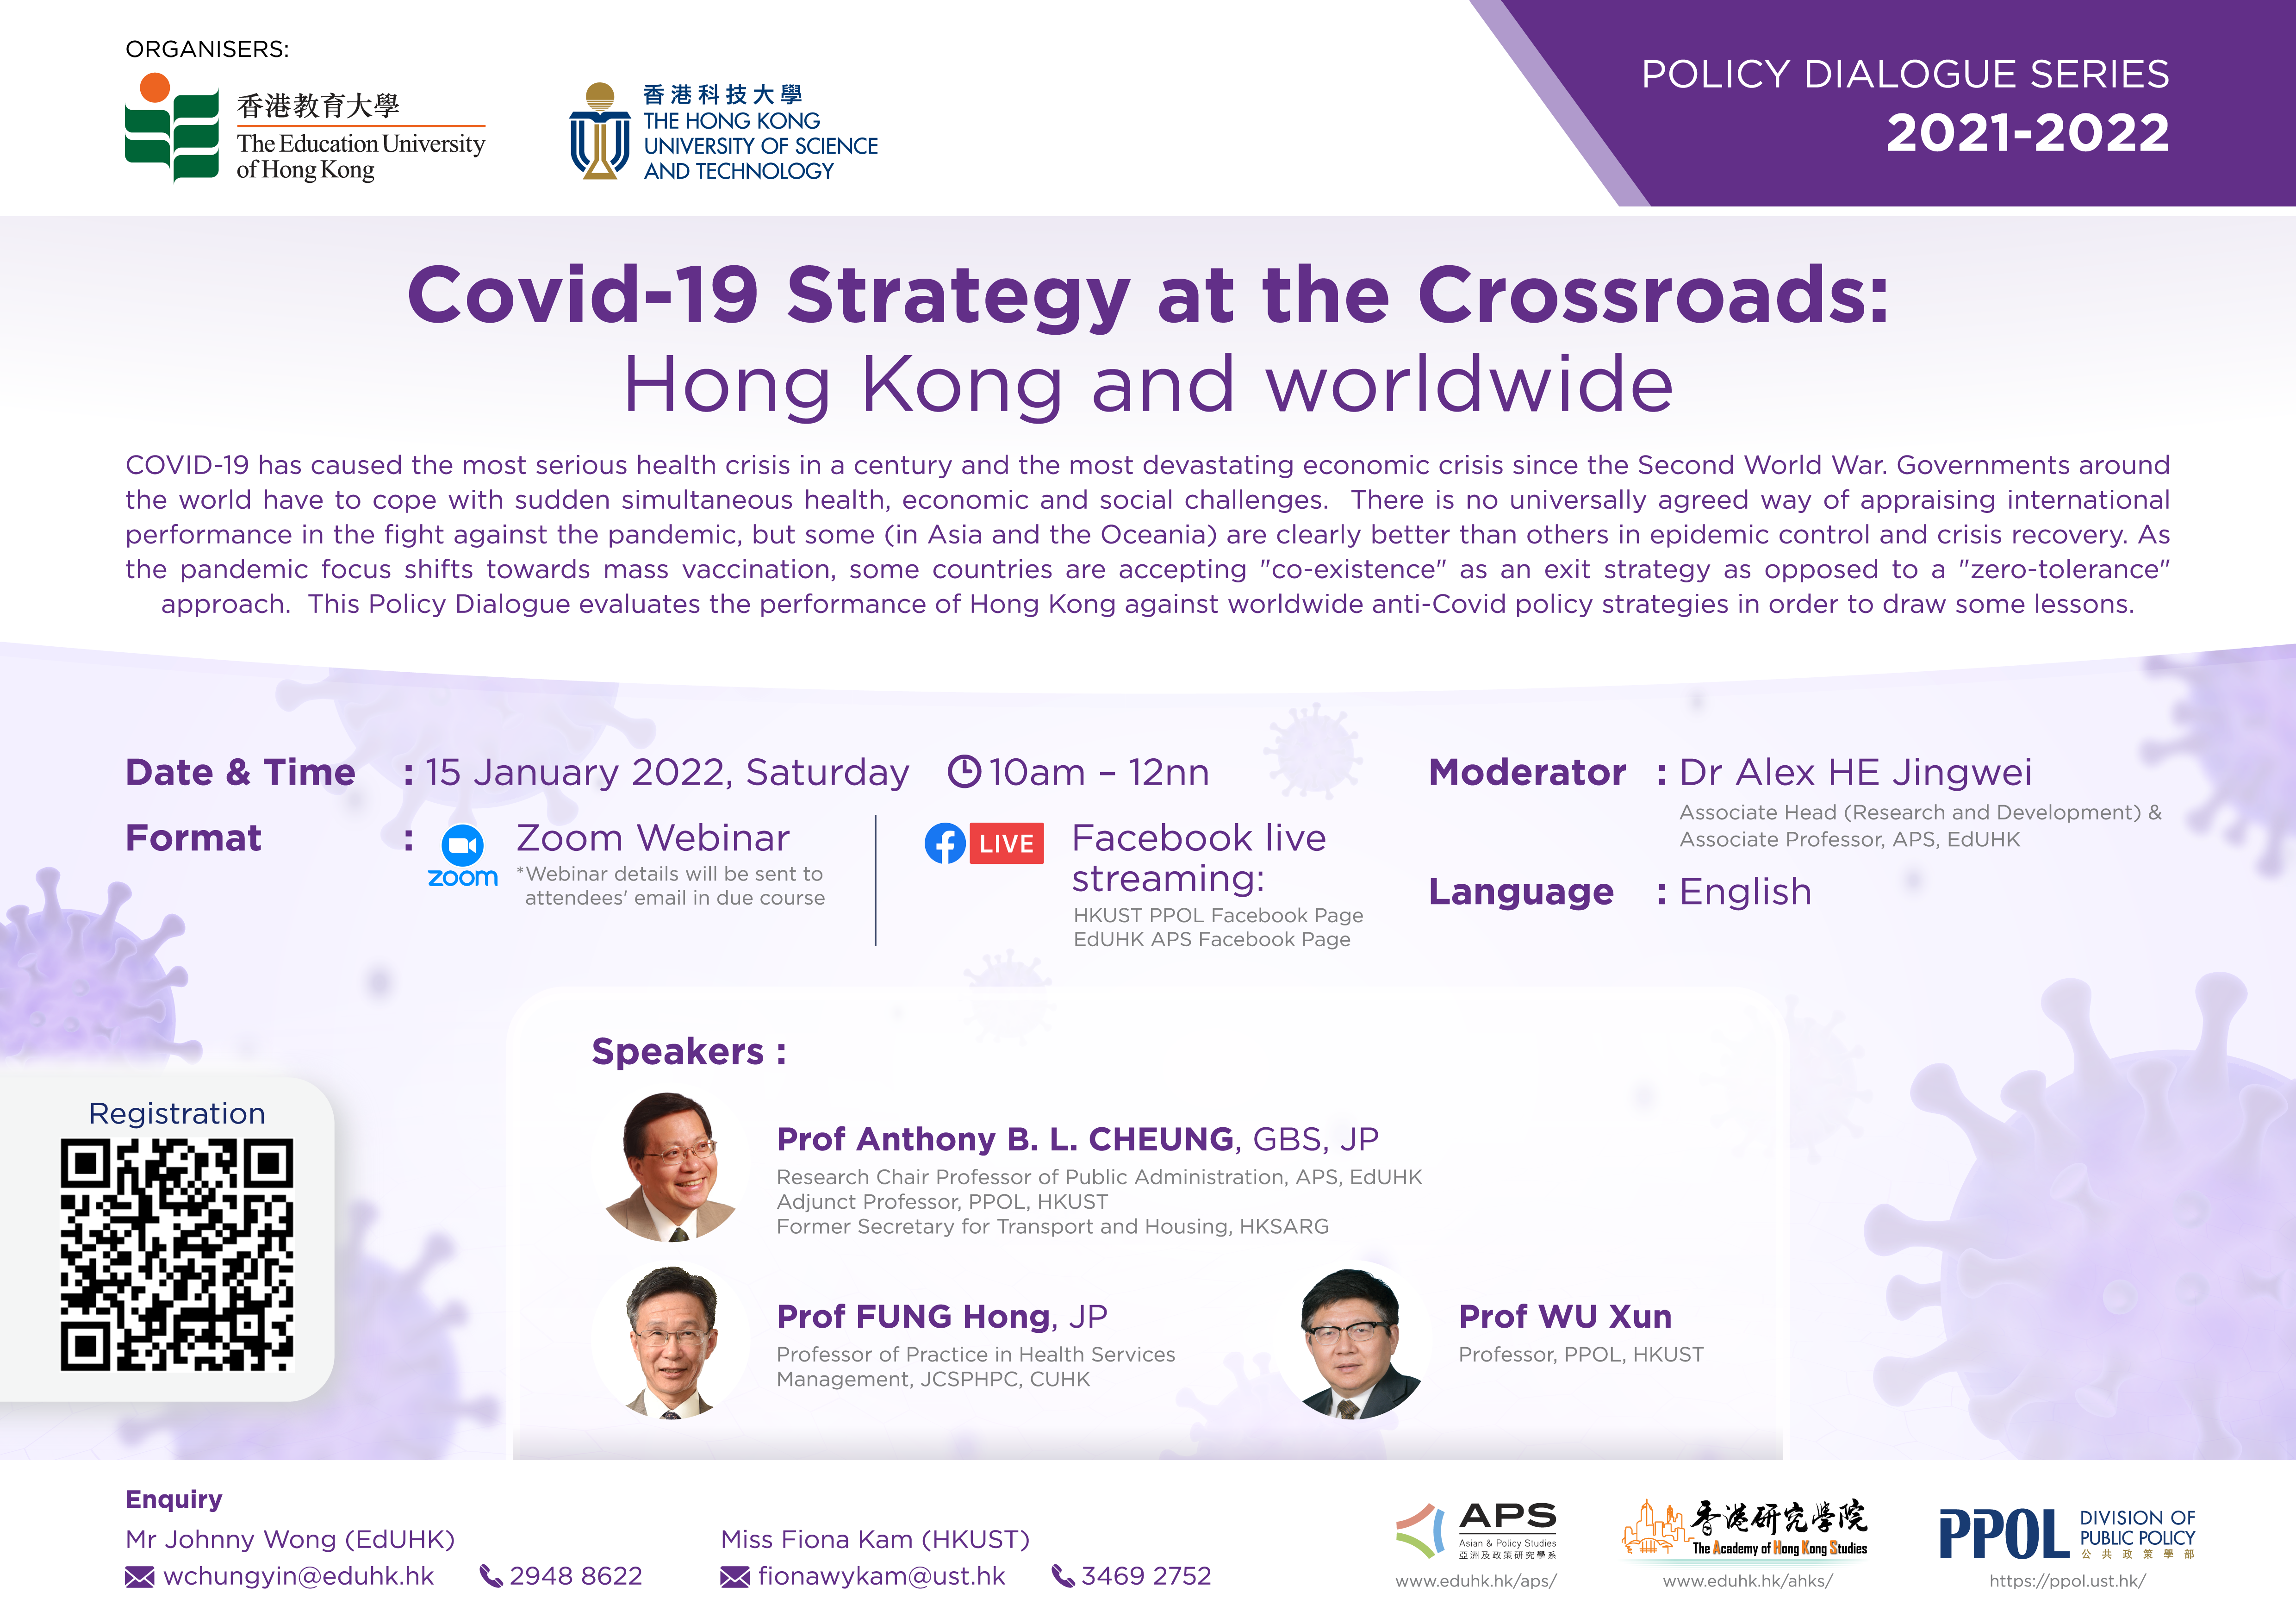 Covid-19 Strategy at the Crossroads: Hong Kong and worldwide